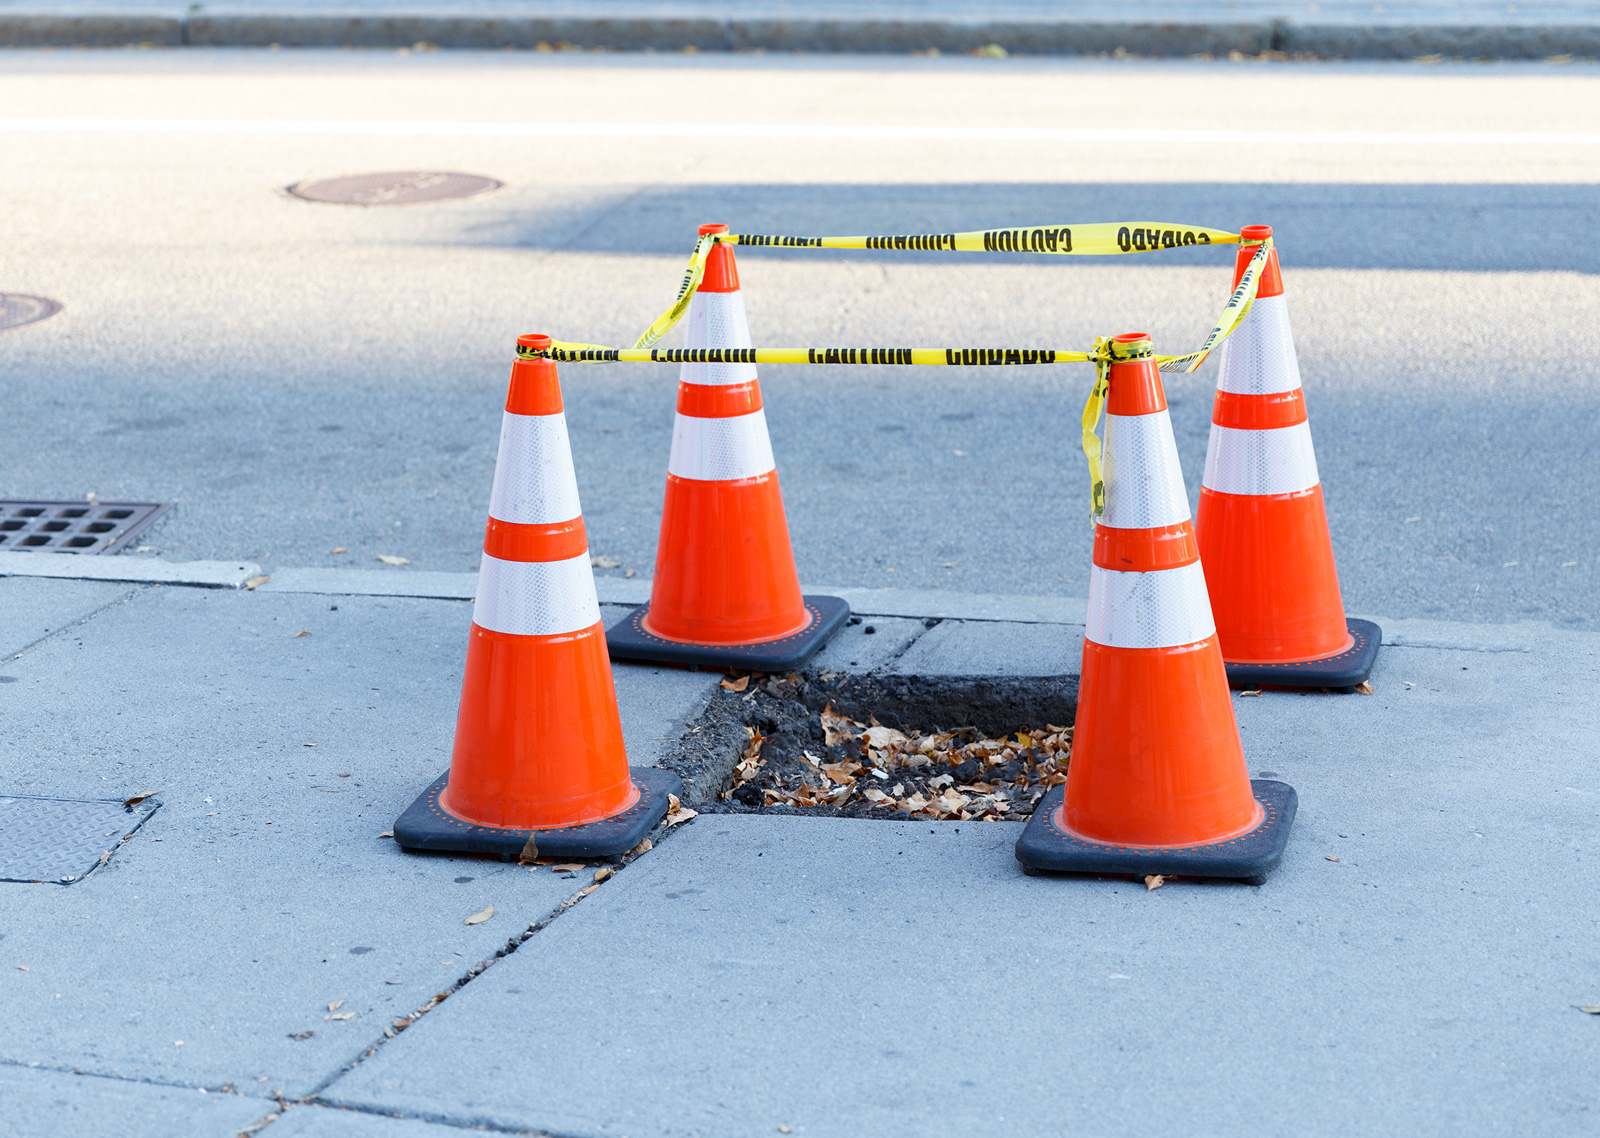 pothole surrounded by cones